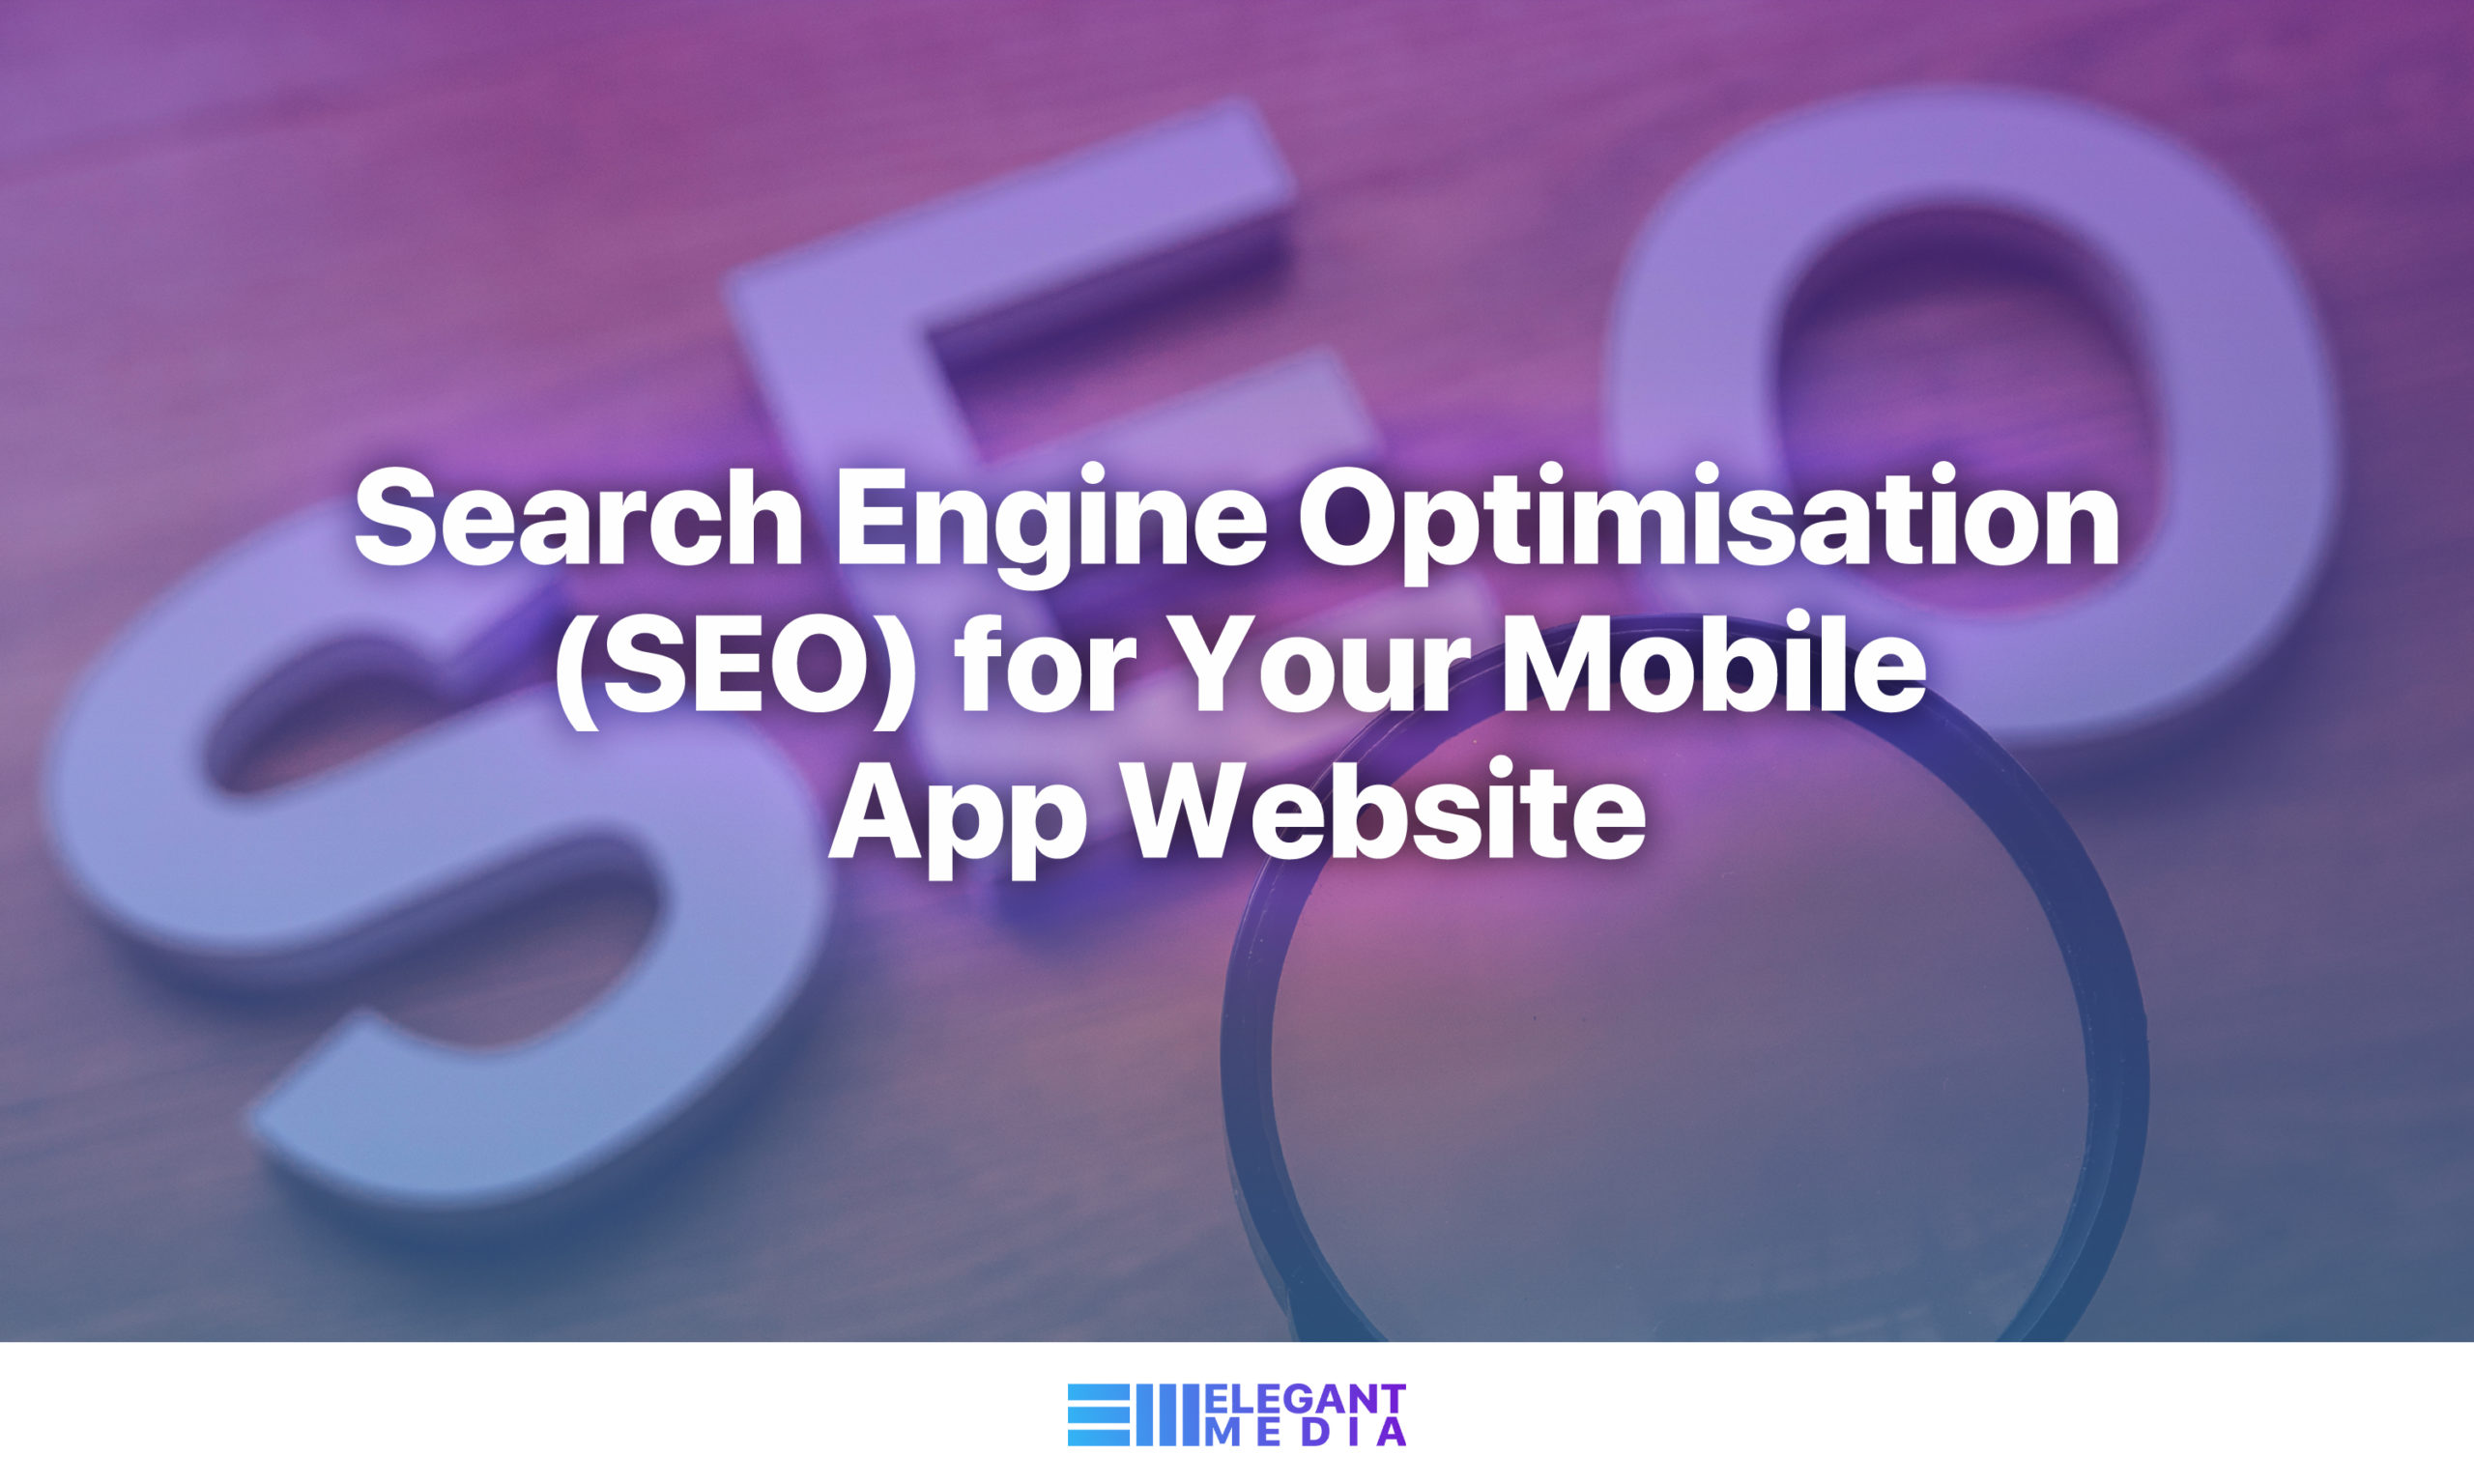 Search Engine Optimisation (SEO) for Your Mobile App Website